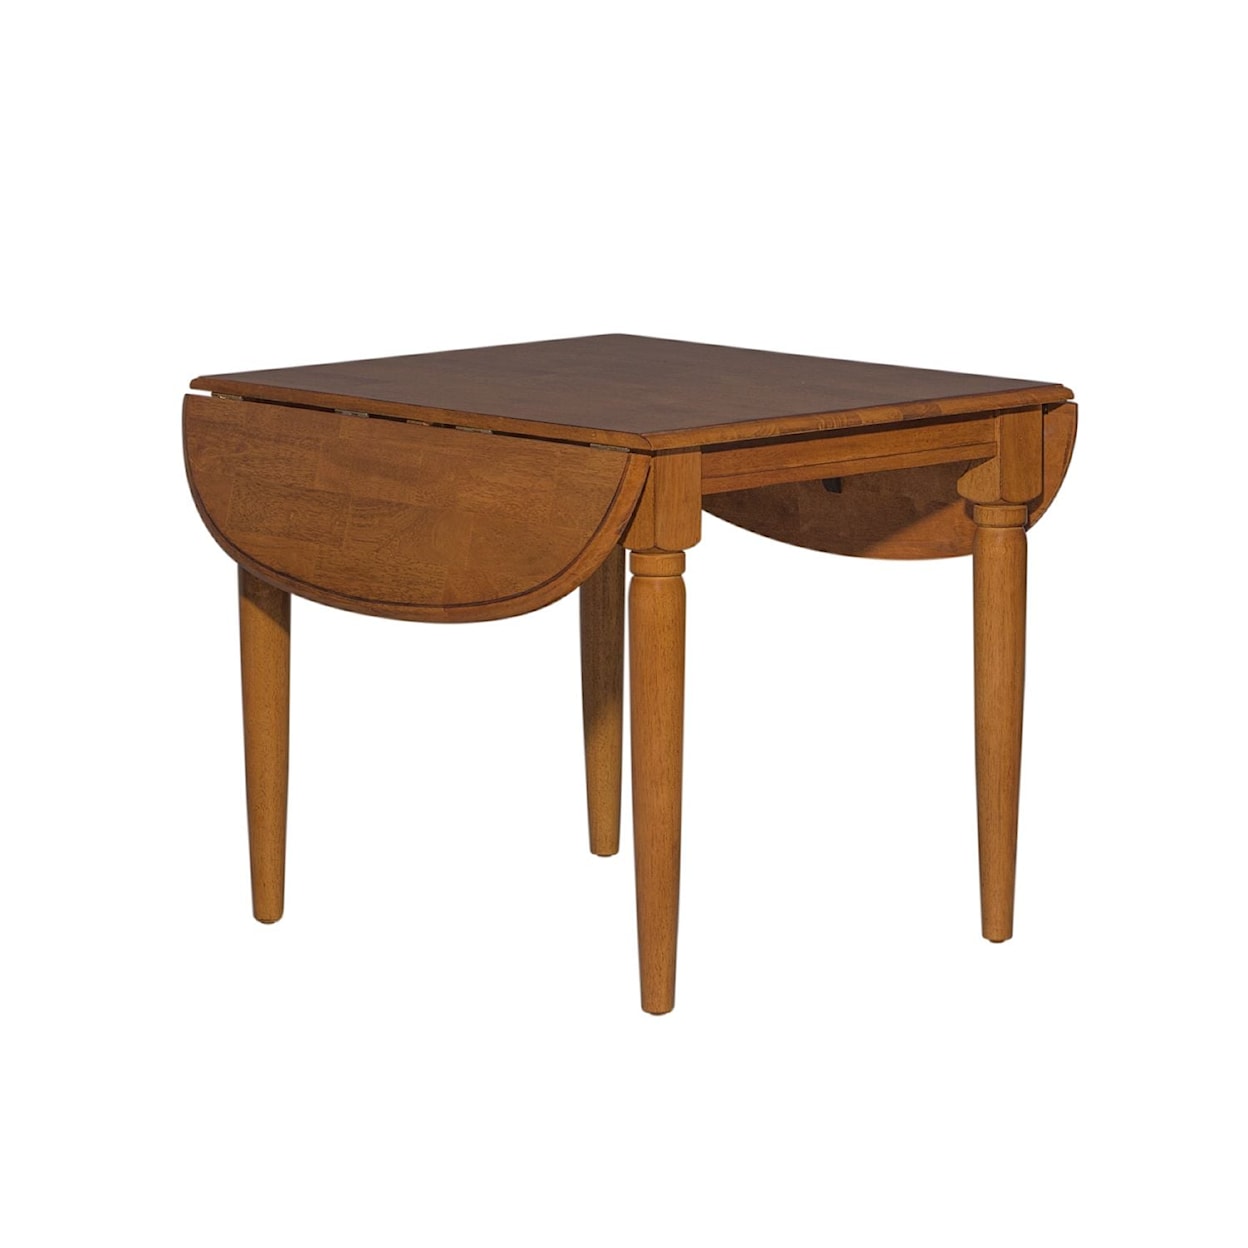 Liberty Furniture Creations II Dinette Table